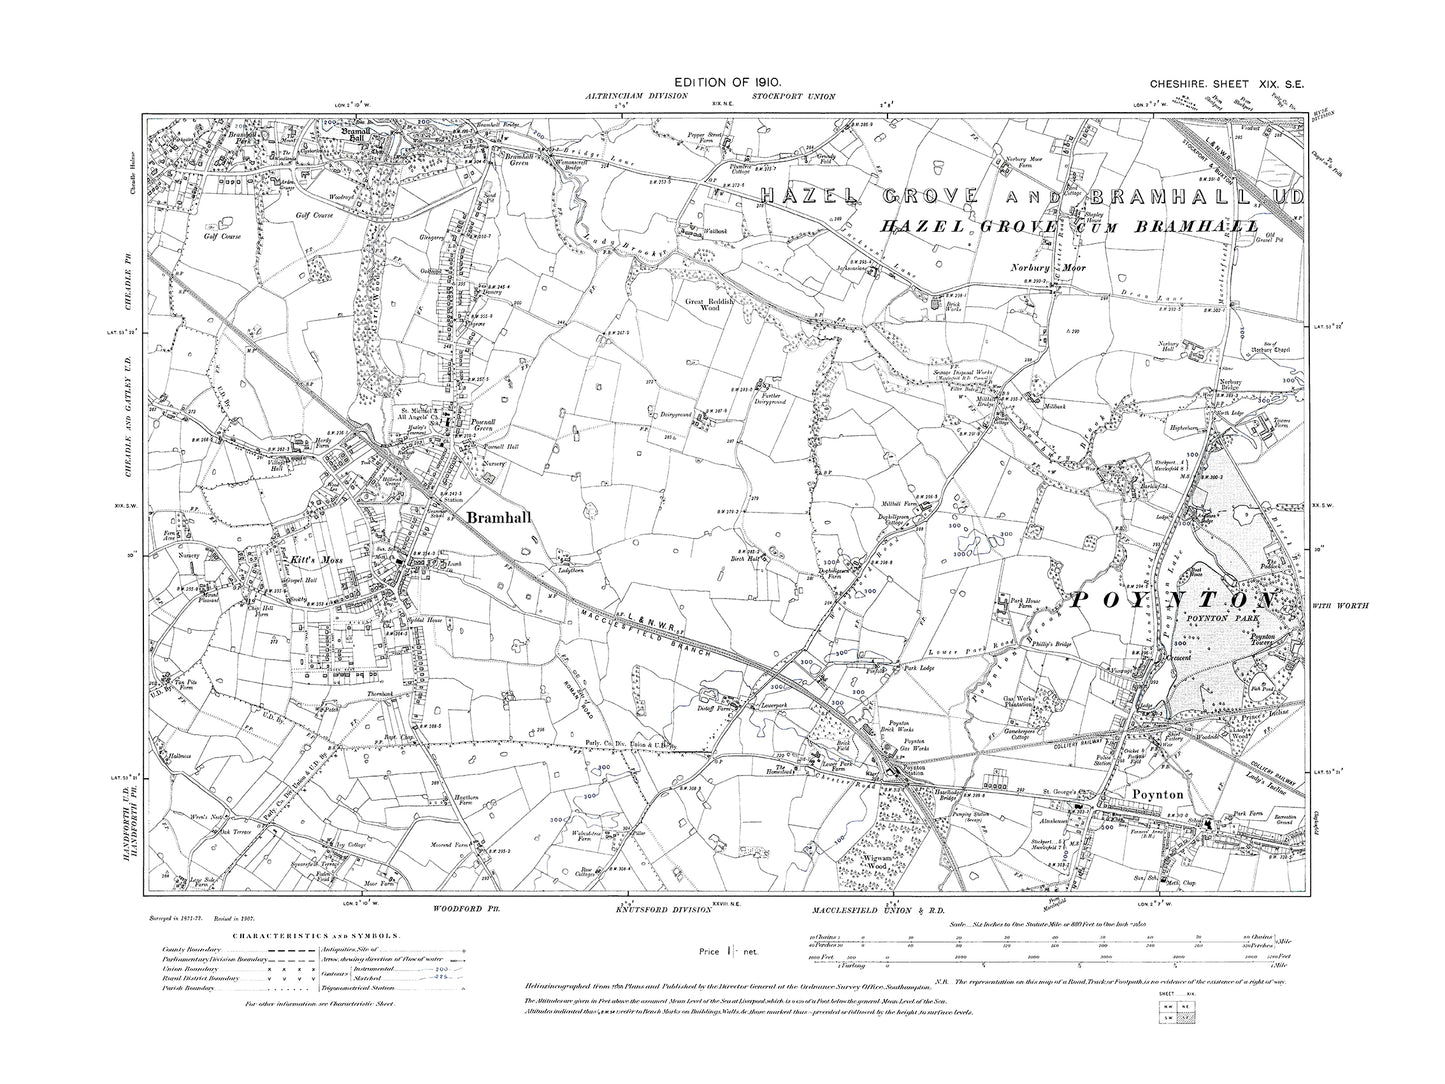 Old OS map dated 1910, showing Bramhall, Poynton in Cheshire 19SE